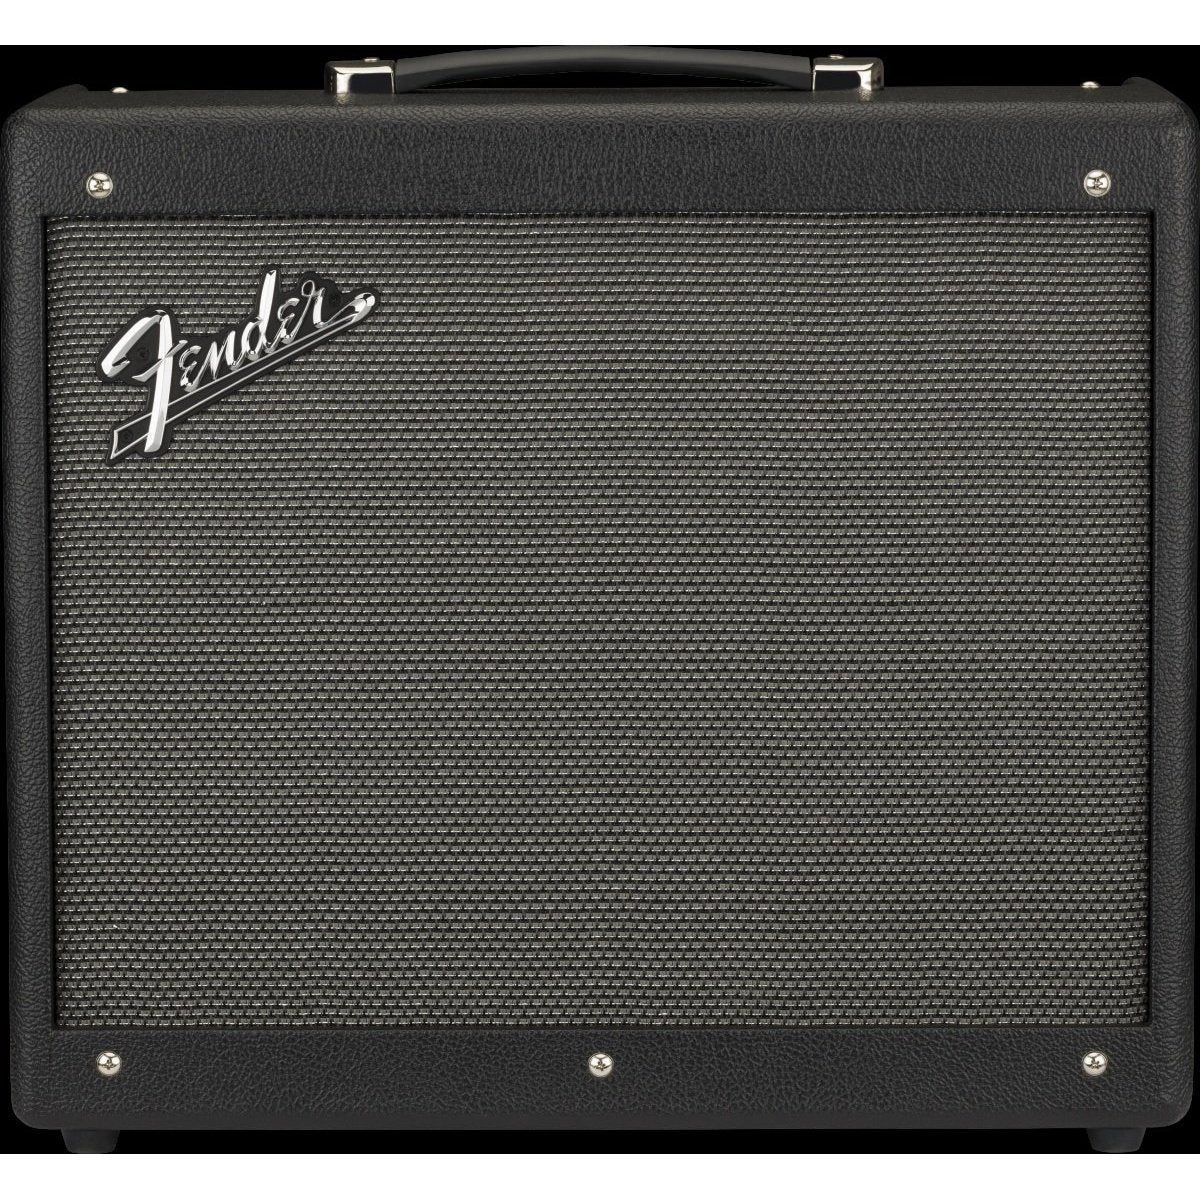 Fender Mustang GTX50 Electric Guitar Amp with 12" Speaker-50 Watts-Music World Academy